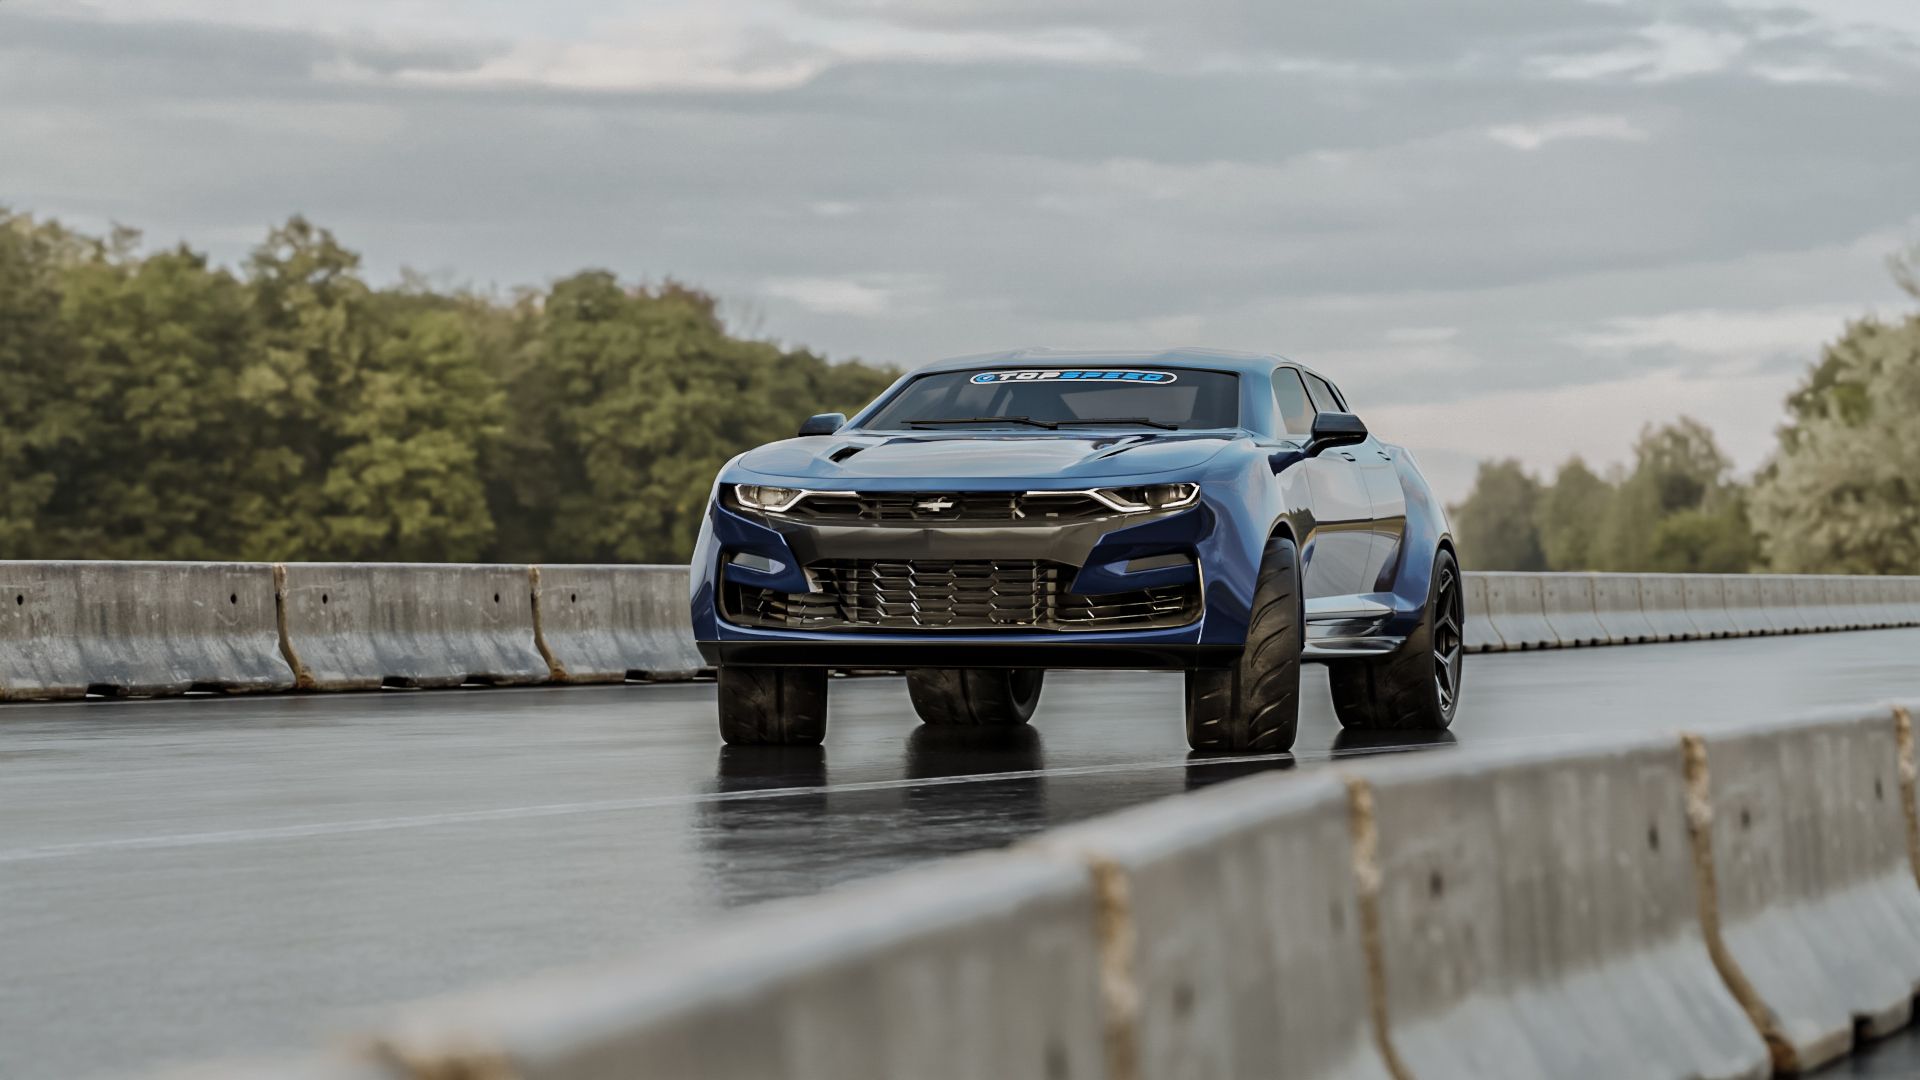 View the 2025 Chevy Camaro in blue